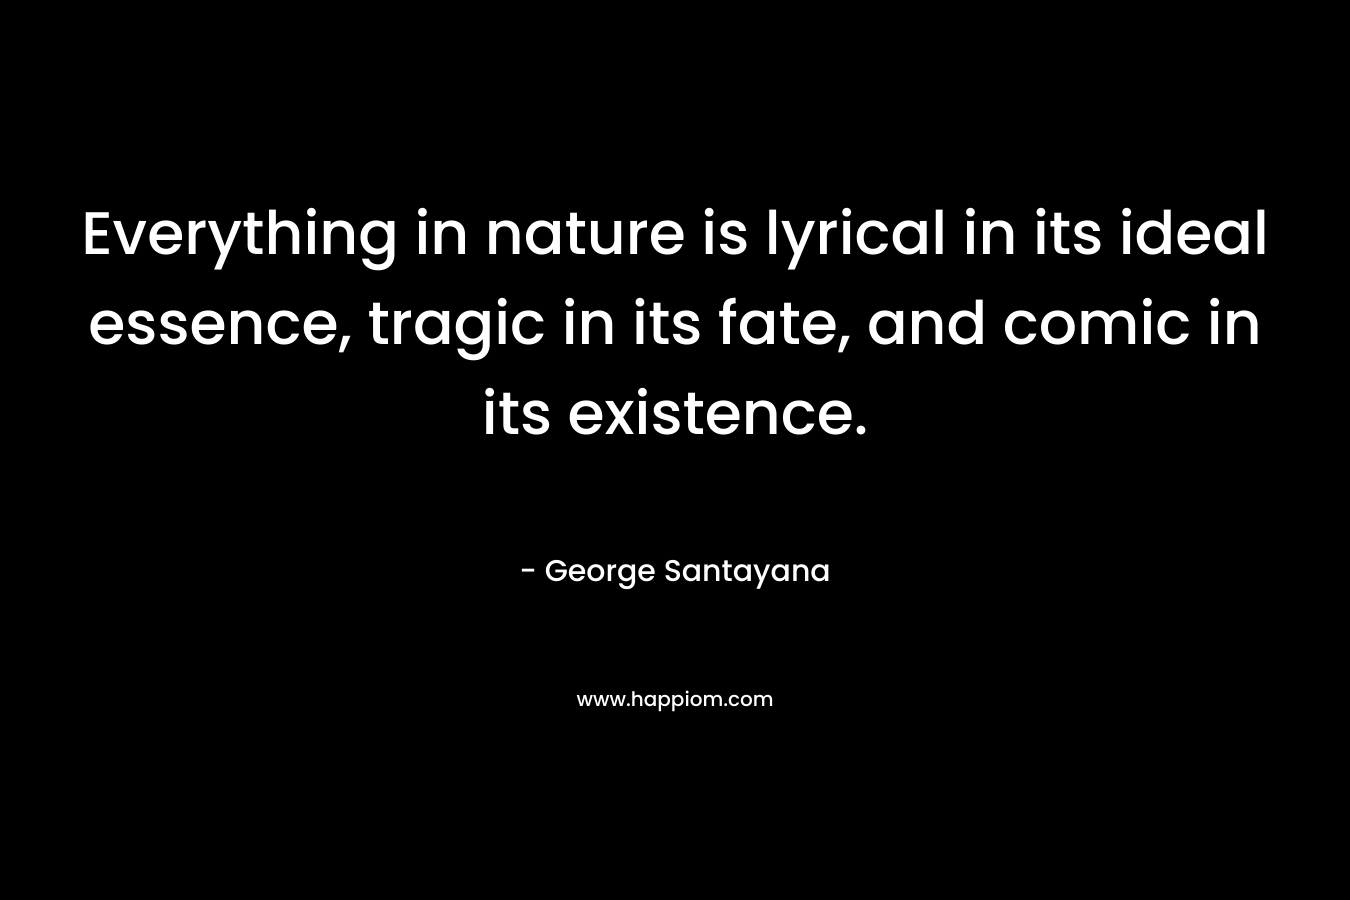 Everything in nature is lyrical in its ideal essence, tragic in its fate, and comic in its existence. – George Santayana